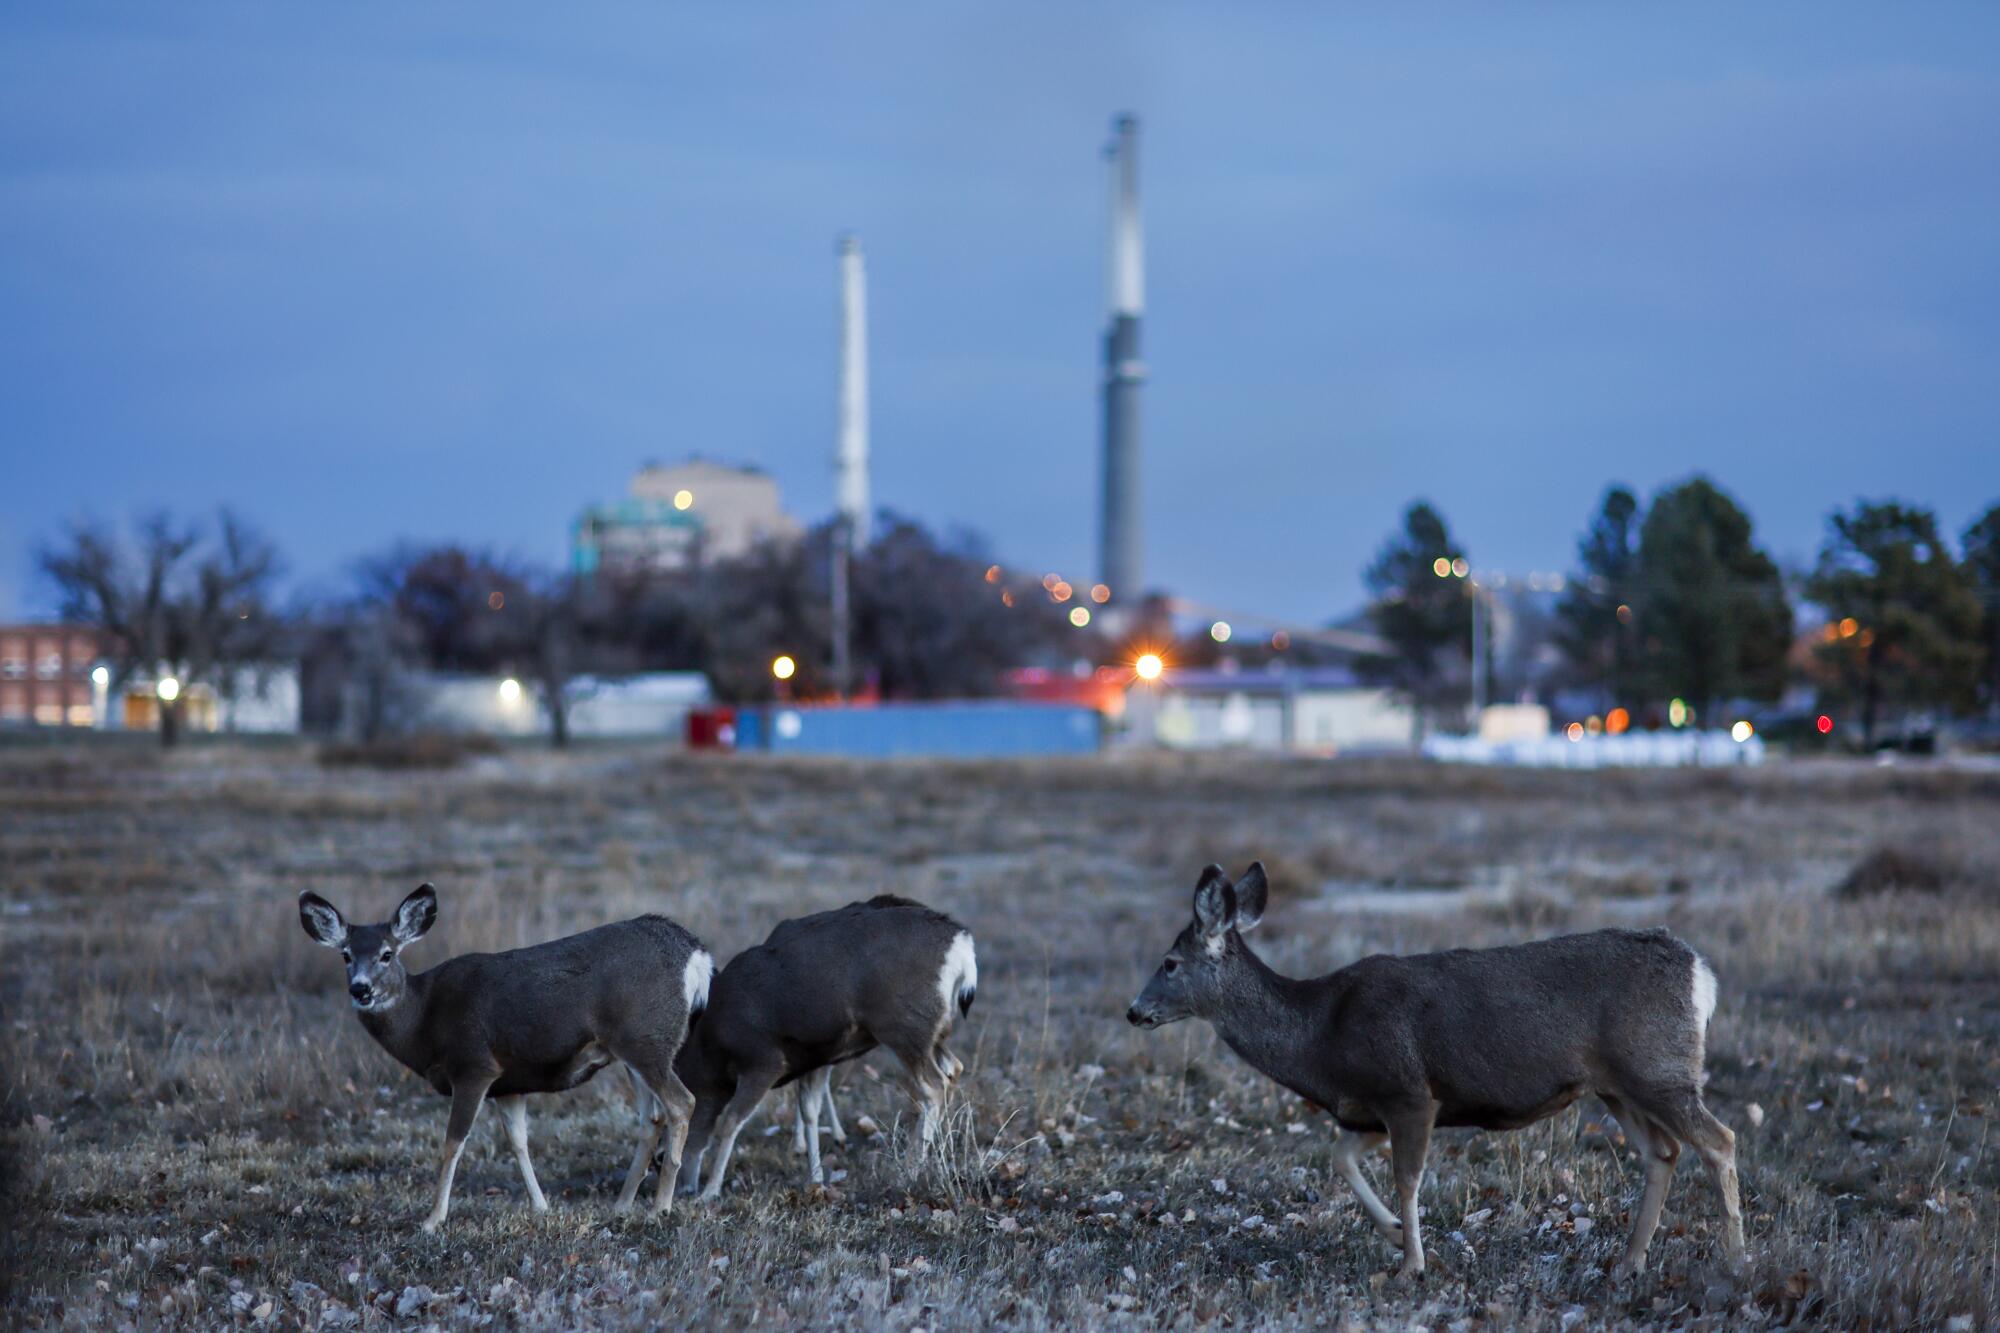 Mule deer roam through the town of Colstrip, not far from the power plant.